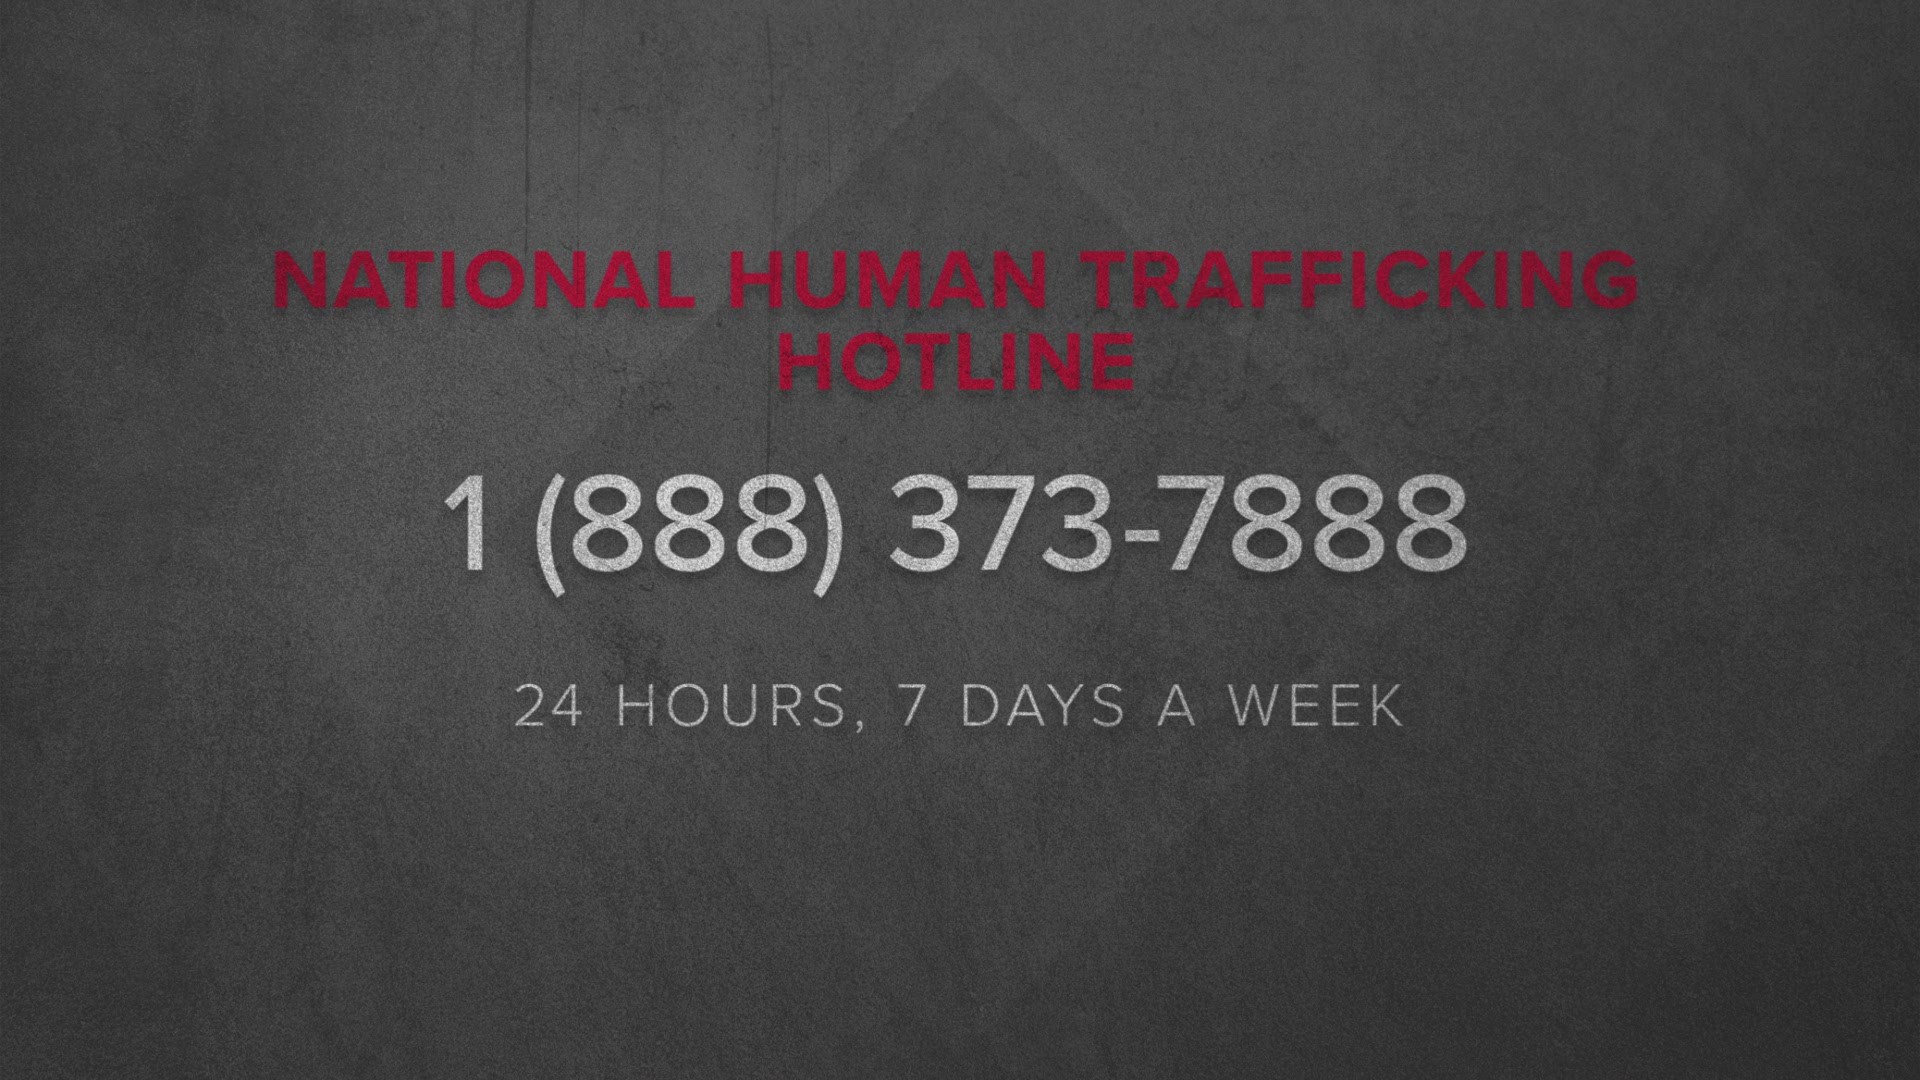 Close to 80,000 children and 300,000 adults in Texas are impacted by human trafficking right now.